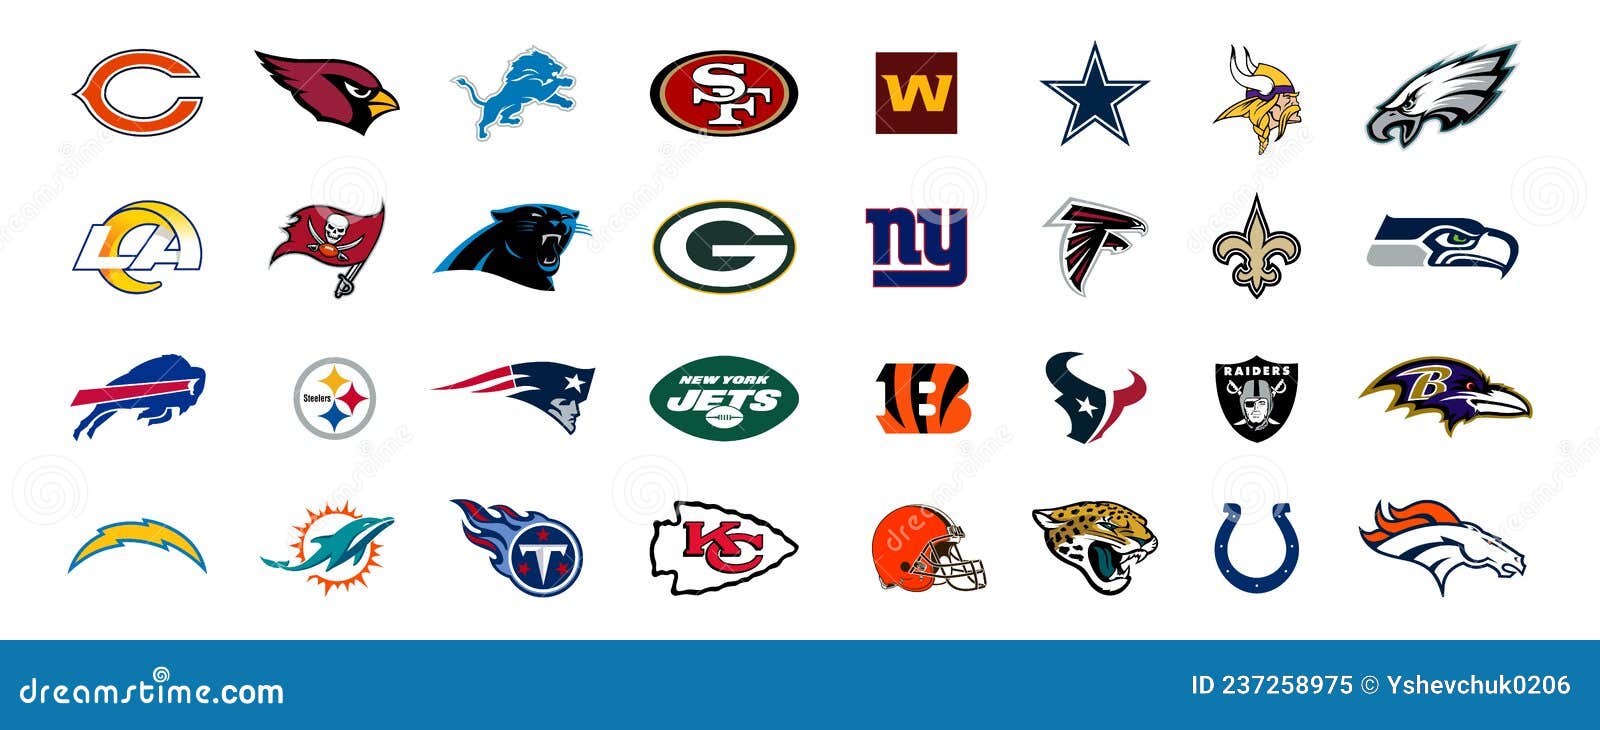 AFC, NFC Conference 2022. Green Bay Packers, Detroit Lions, Dallas